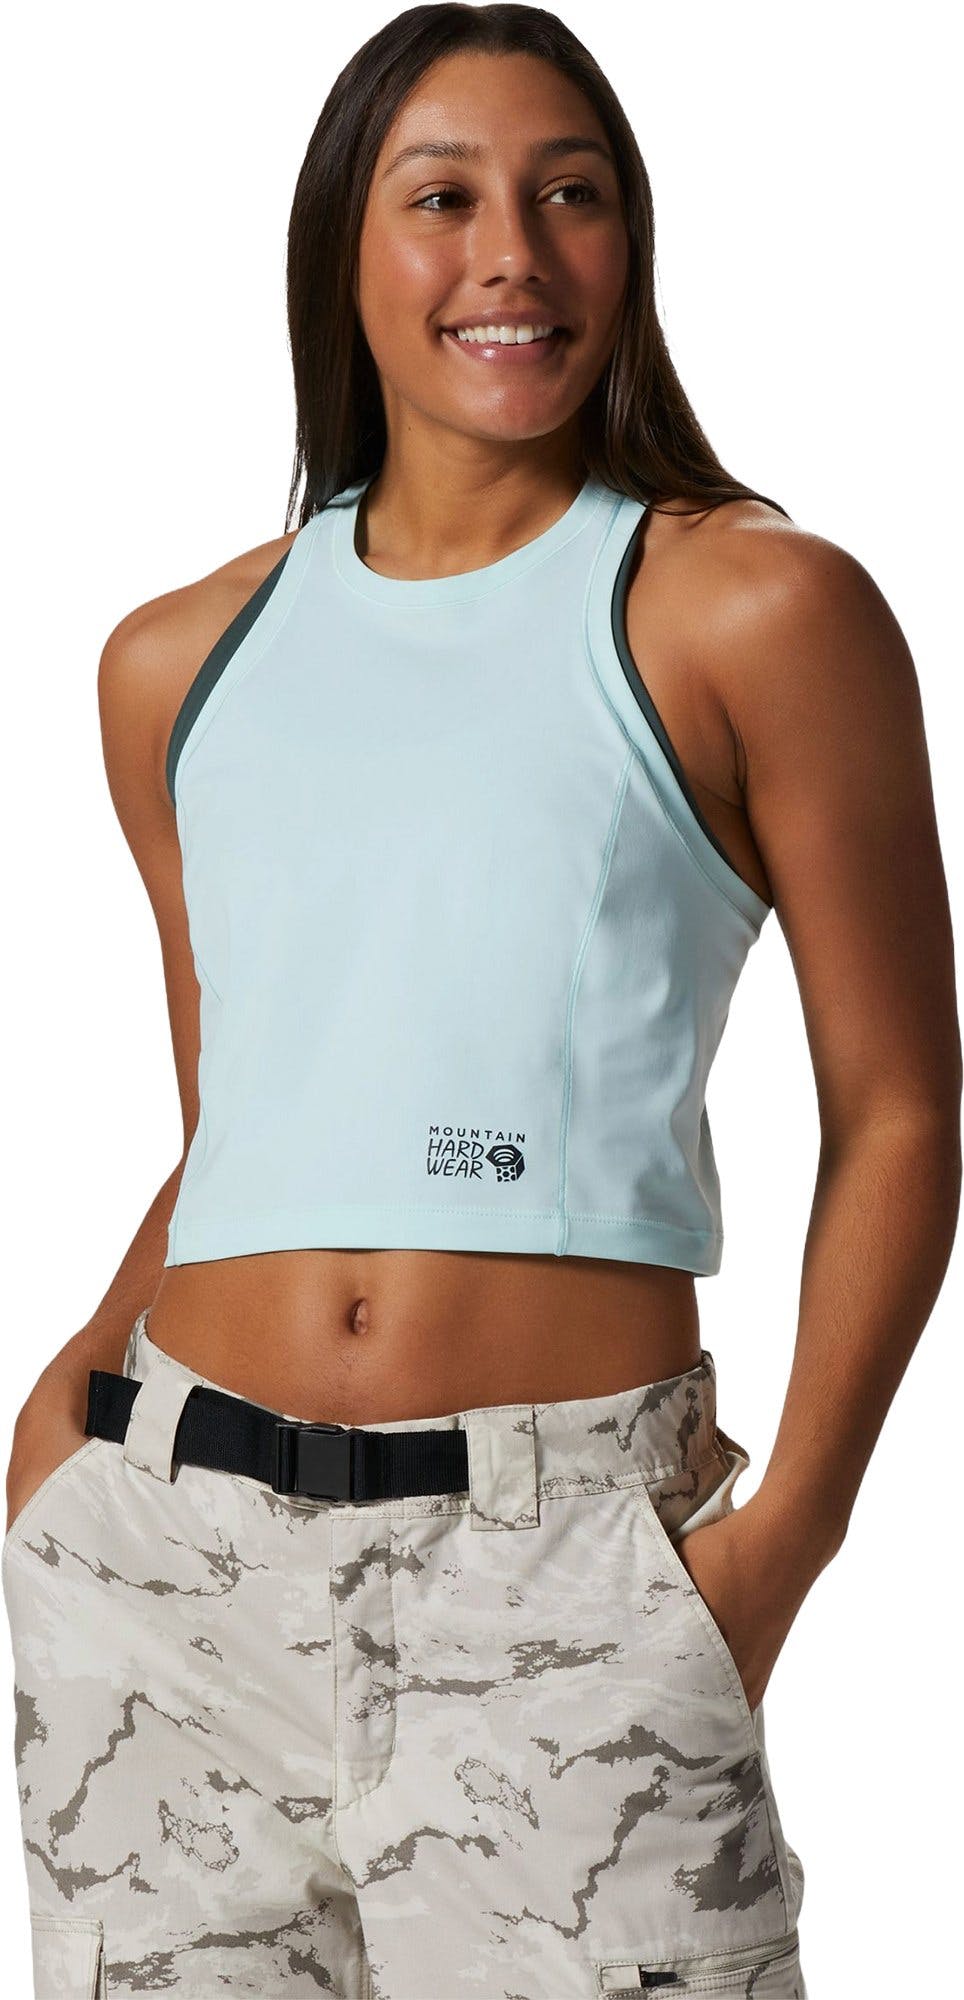 Product image for Mountain Stretch Tanklette - Women's